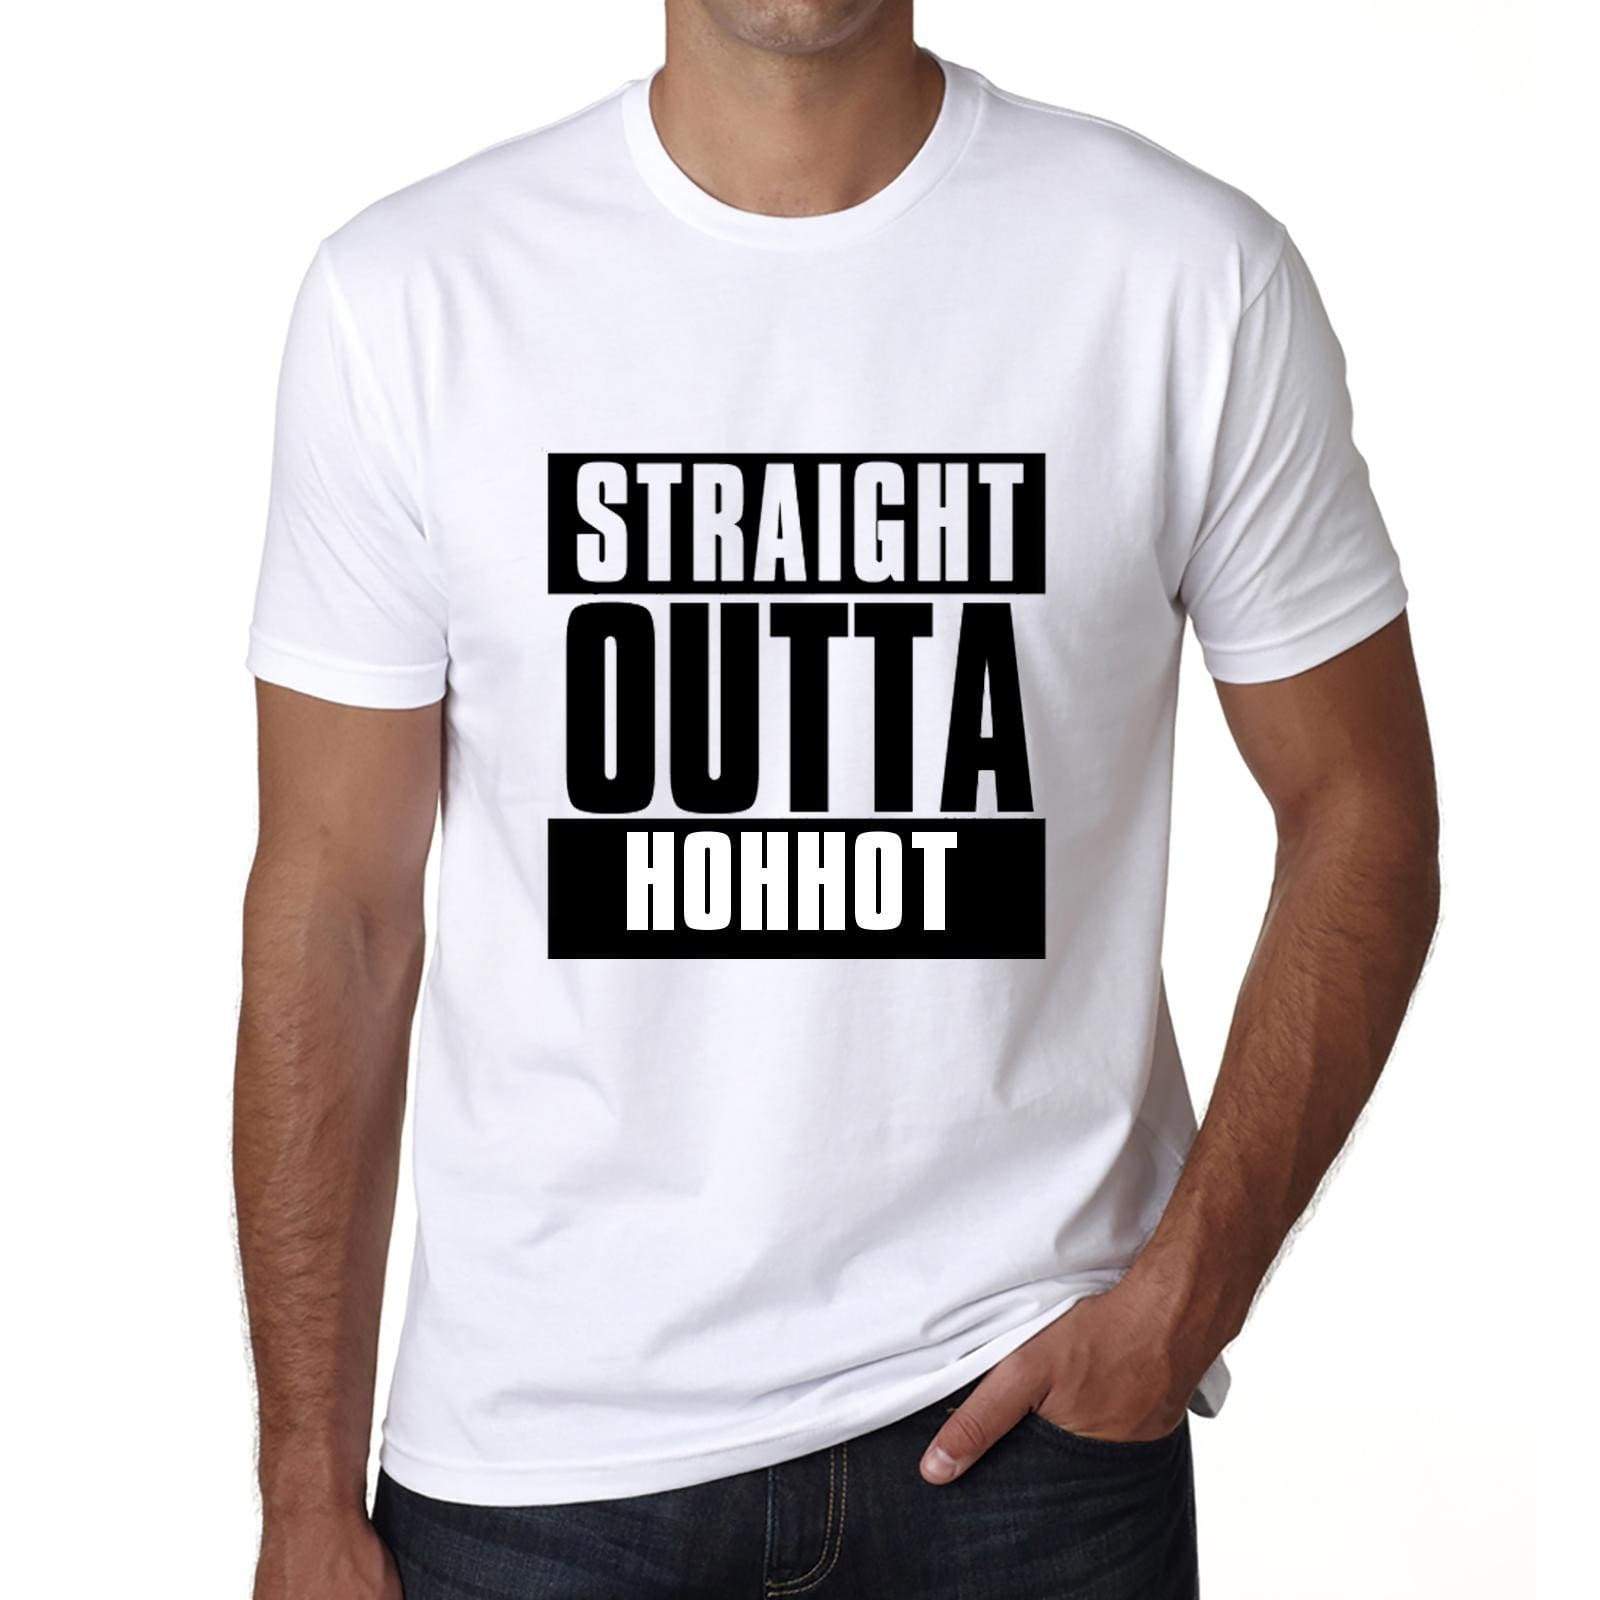 Straight Outta Hohhot Mens Short Sleeve Round Neck T-Shirt 00027 - White / S - Casual